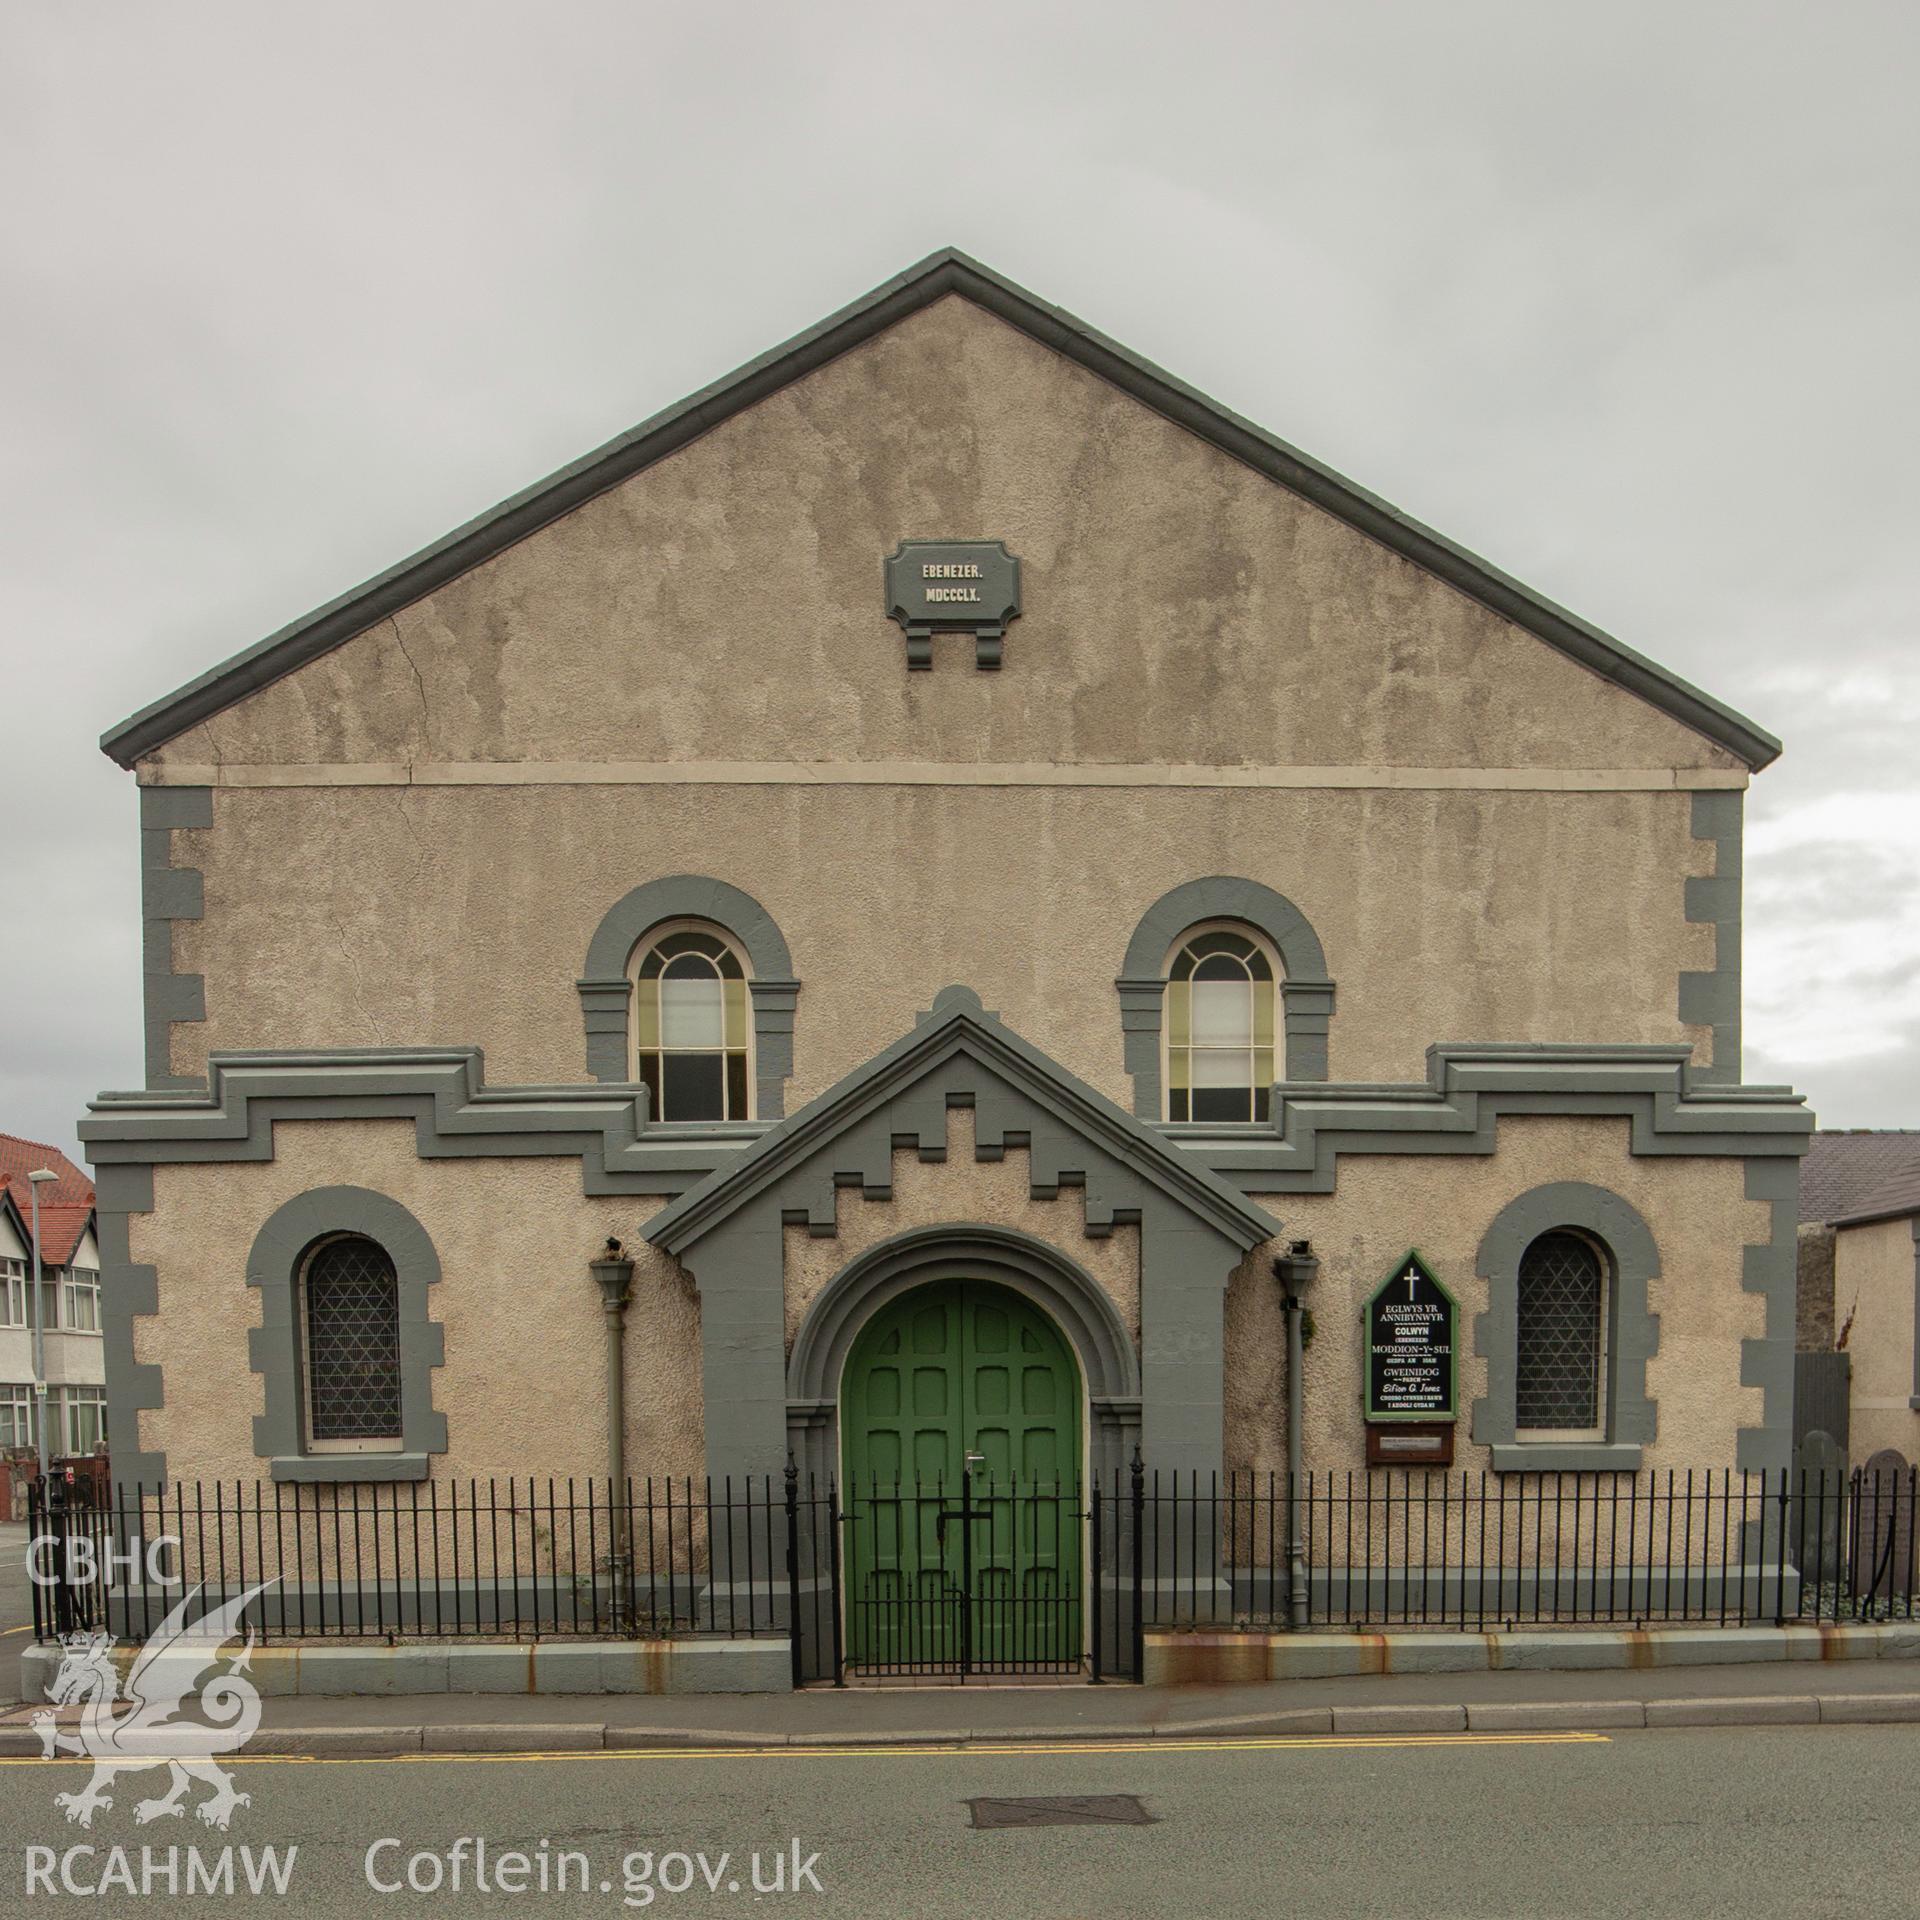 Colour photograph showing front elevation and entrance of Ebeneser Welsh Independent Chapel on Abergele Road and Albert Road, Old Colwyn. Photographed by Richard Barrett on 17th September 2018.